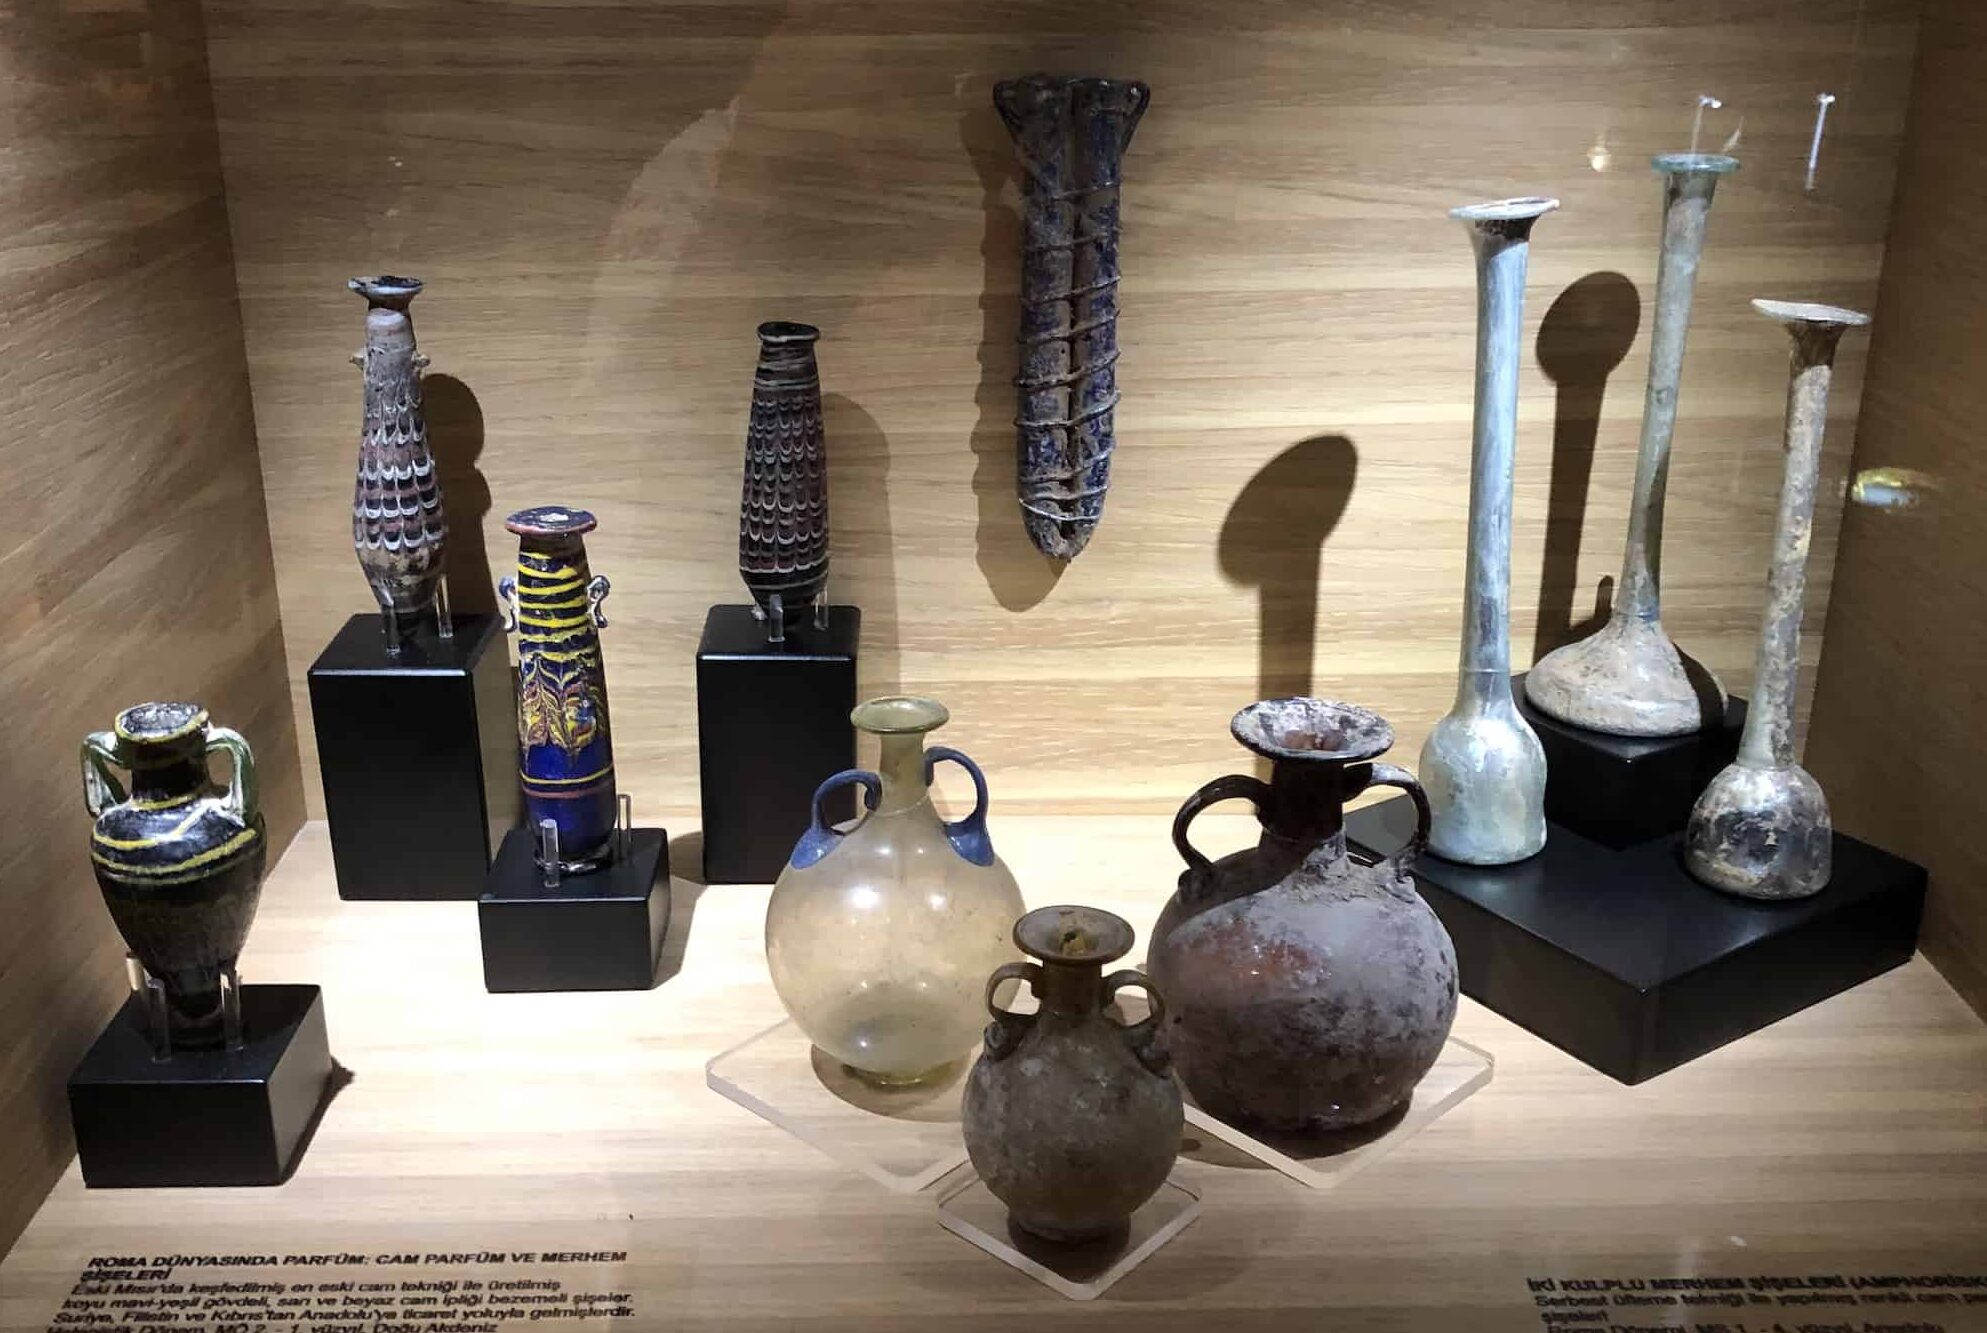 Perfume and unguent bottles made of glass at the Erimtan Archaeology and Arts Museum in Ankara, Turkey